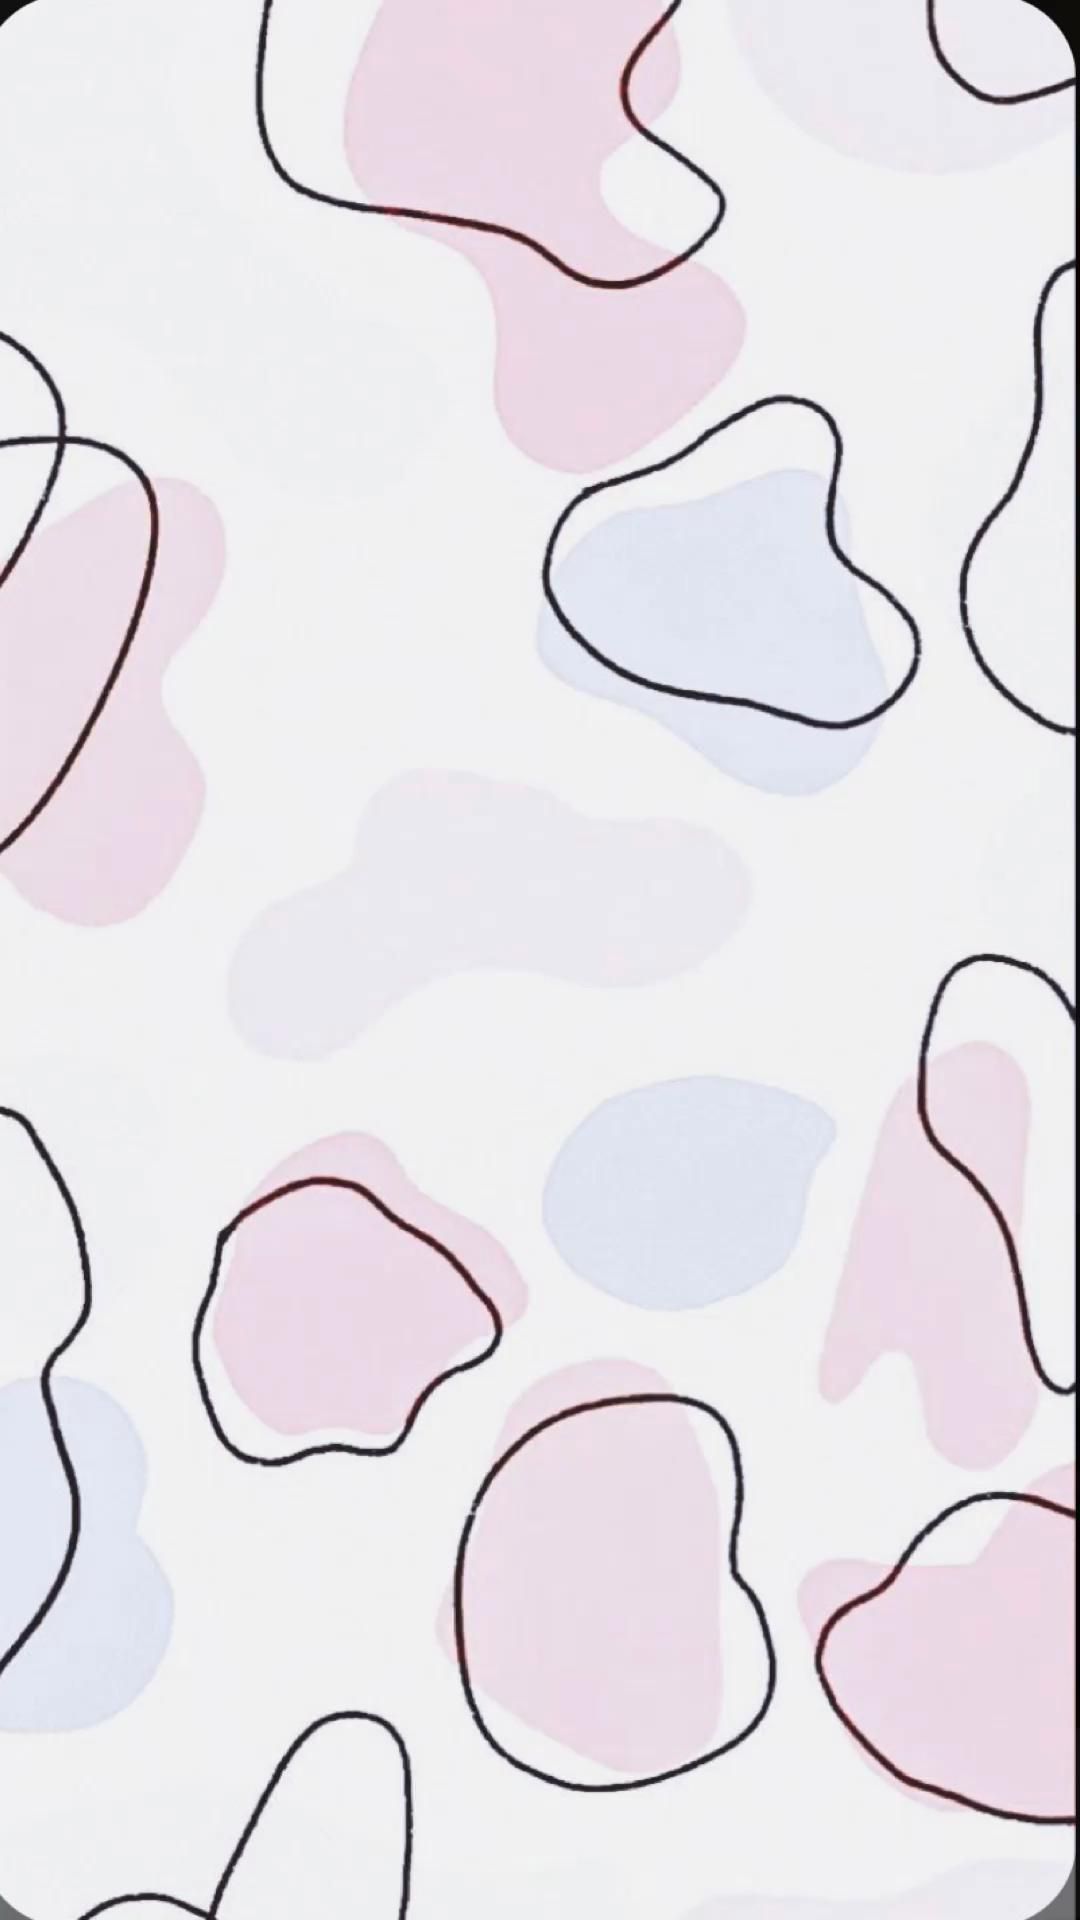 Cute girly wallpaper for phone with abstract shapes in pastel colors - Cow